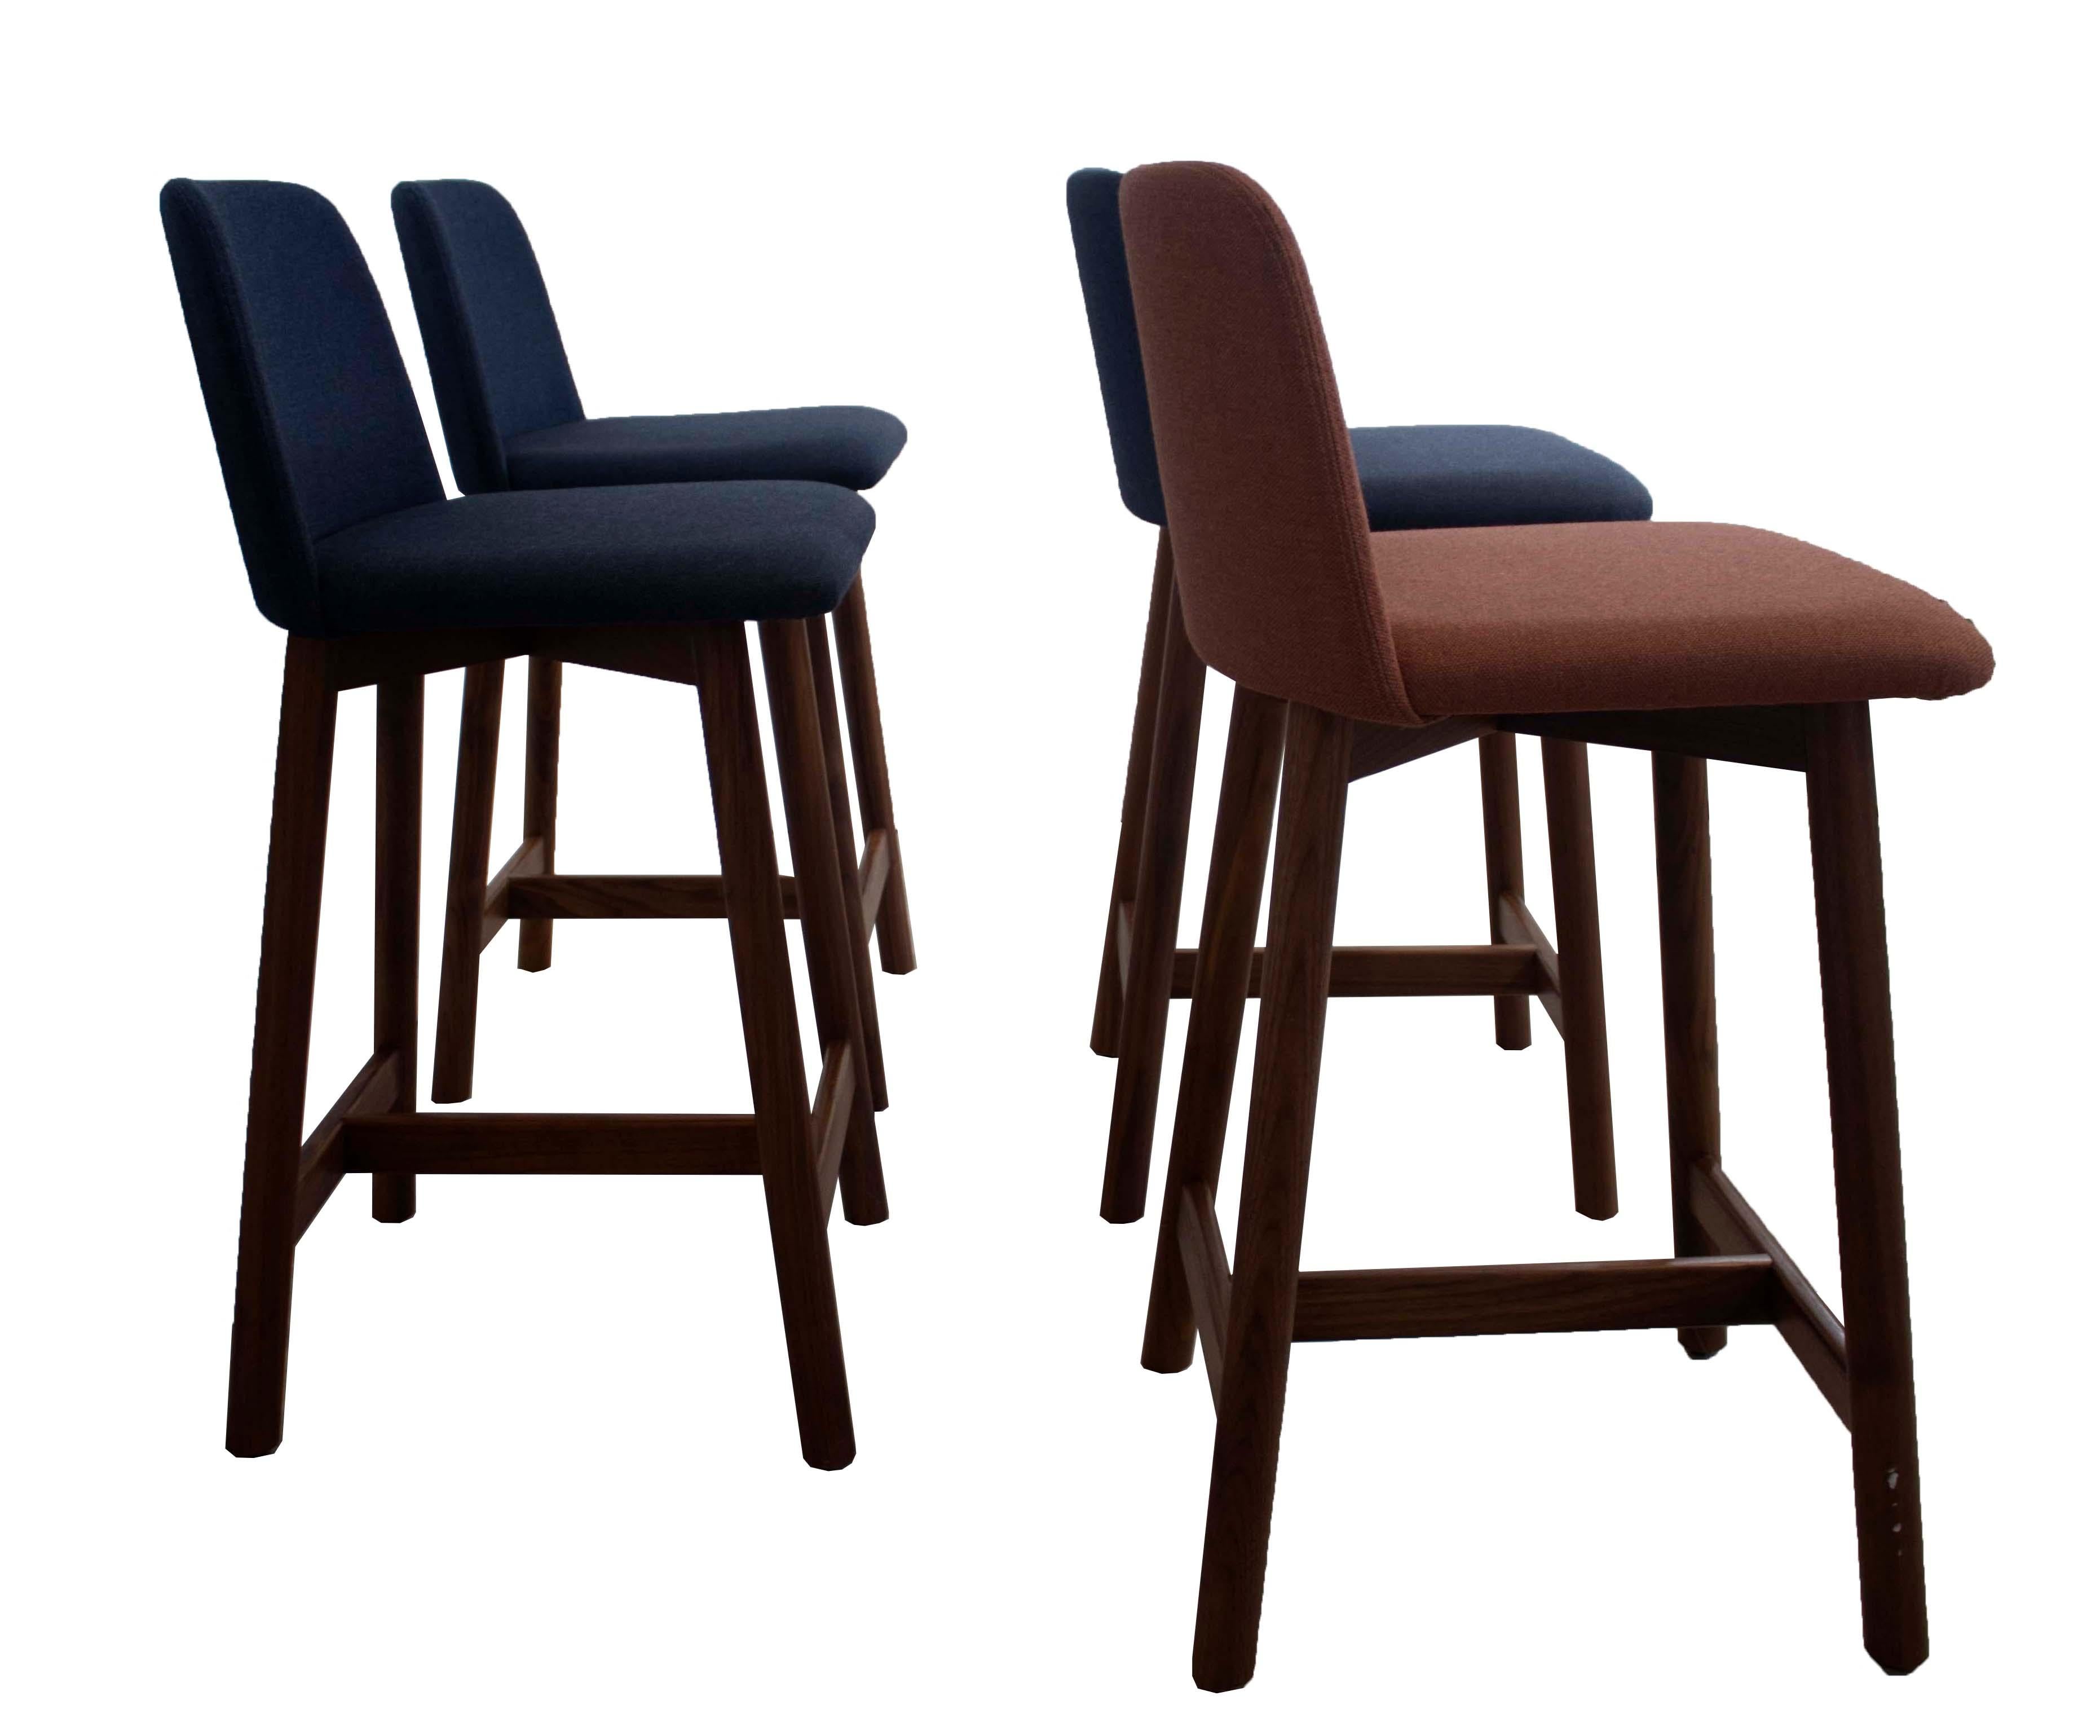 Comfortable and sophisticated, this set of (4) Blu Dot Barstools are in excellent condition, including the upholstered seats. The seats and backs are upholstered (3) in navy blue and (1) in burnt orange - All have the same lovely walnut wood base